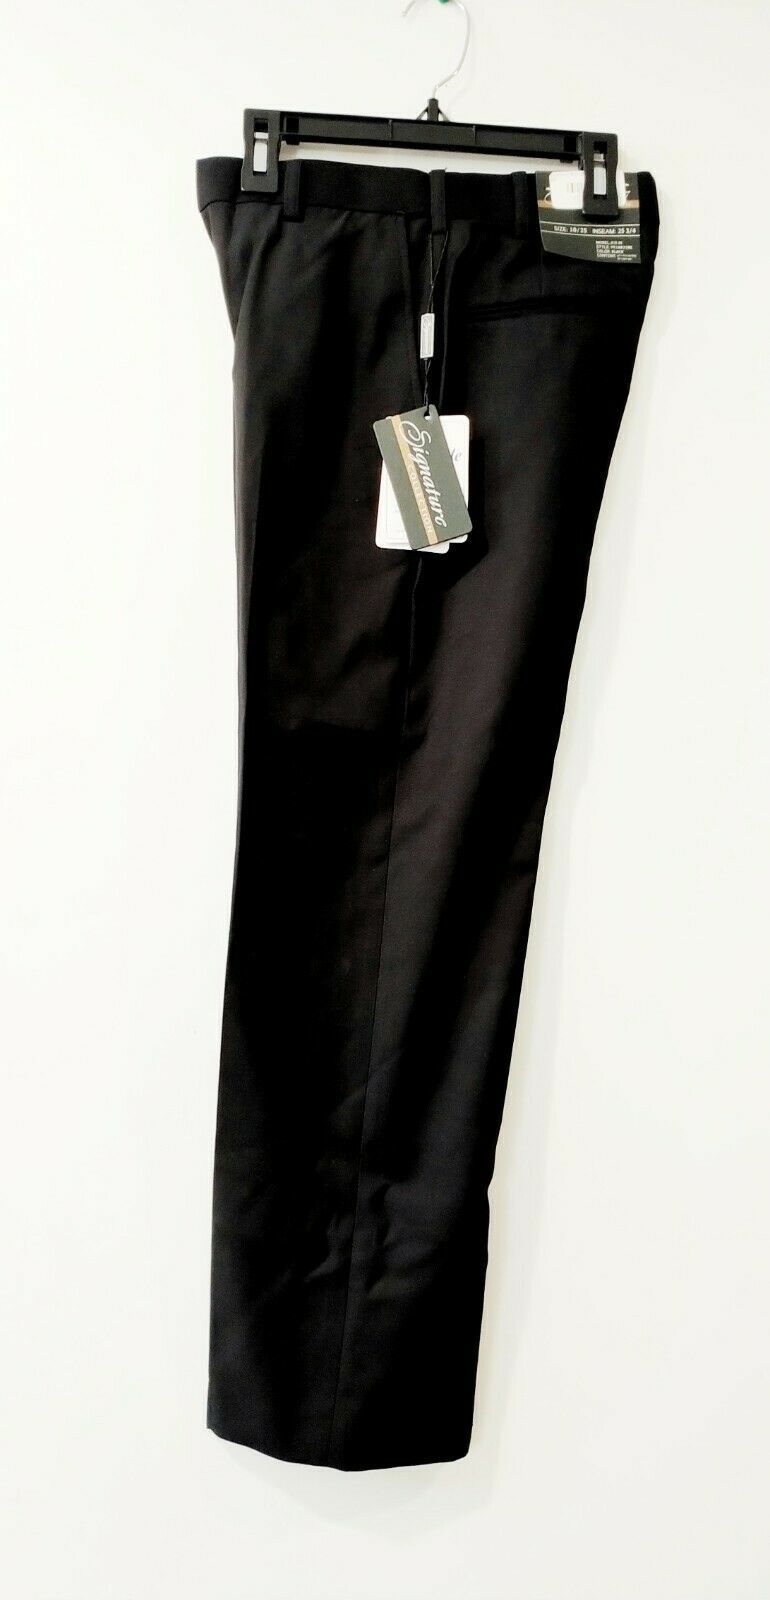 Dress Pants Boys Trousers Size 16 / 28 Black Color NWT Signature Collections